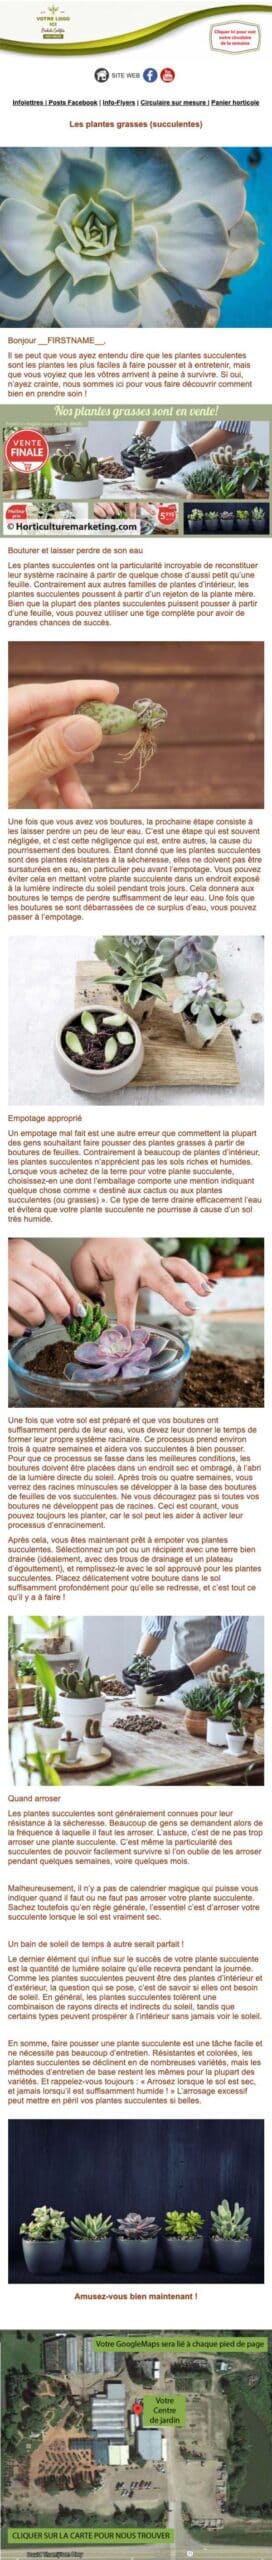 Infolettre horticole